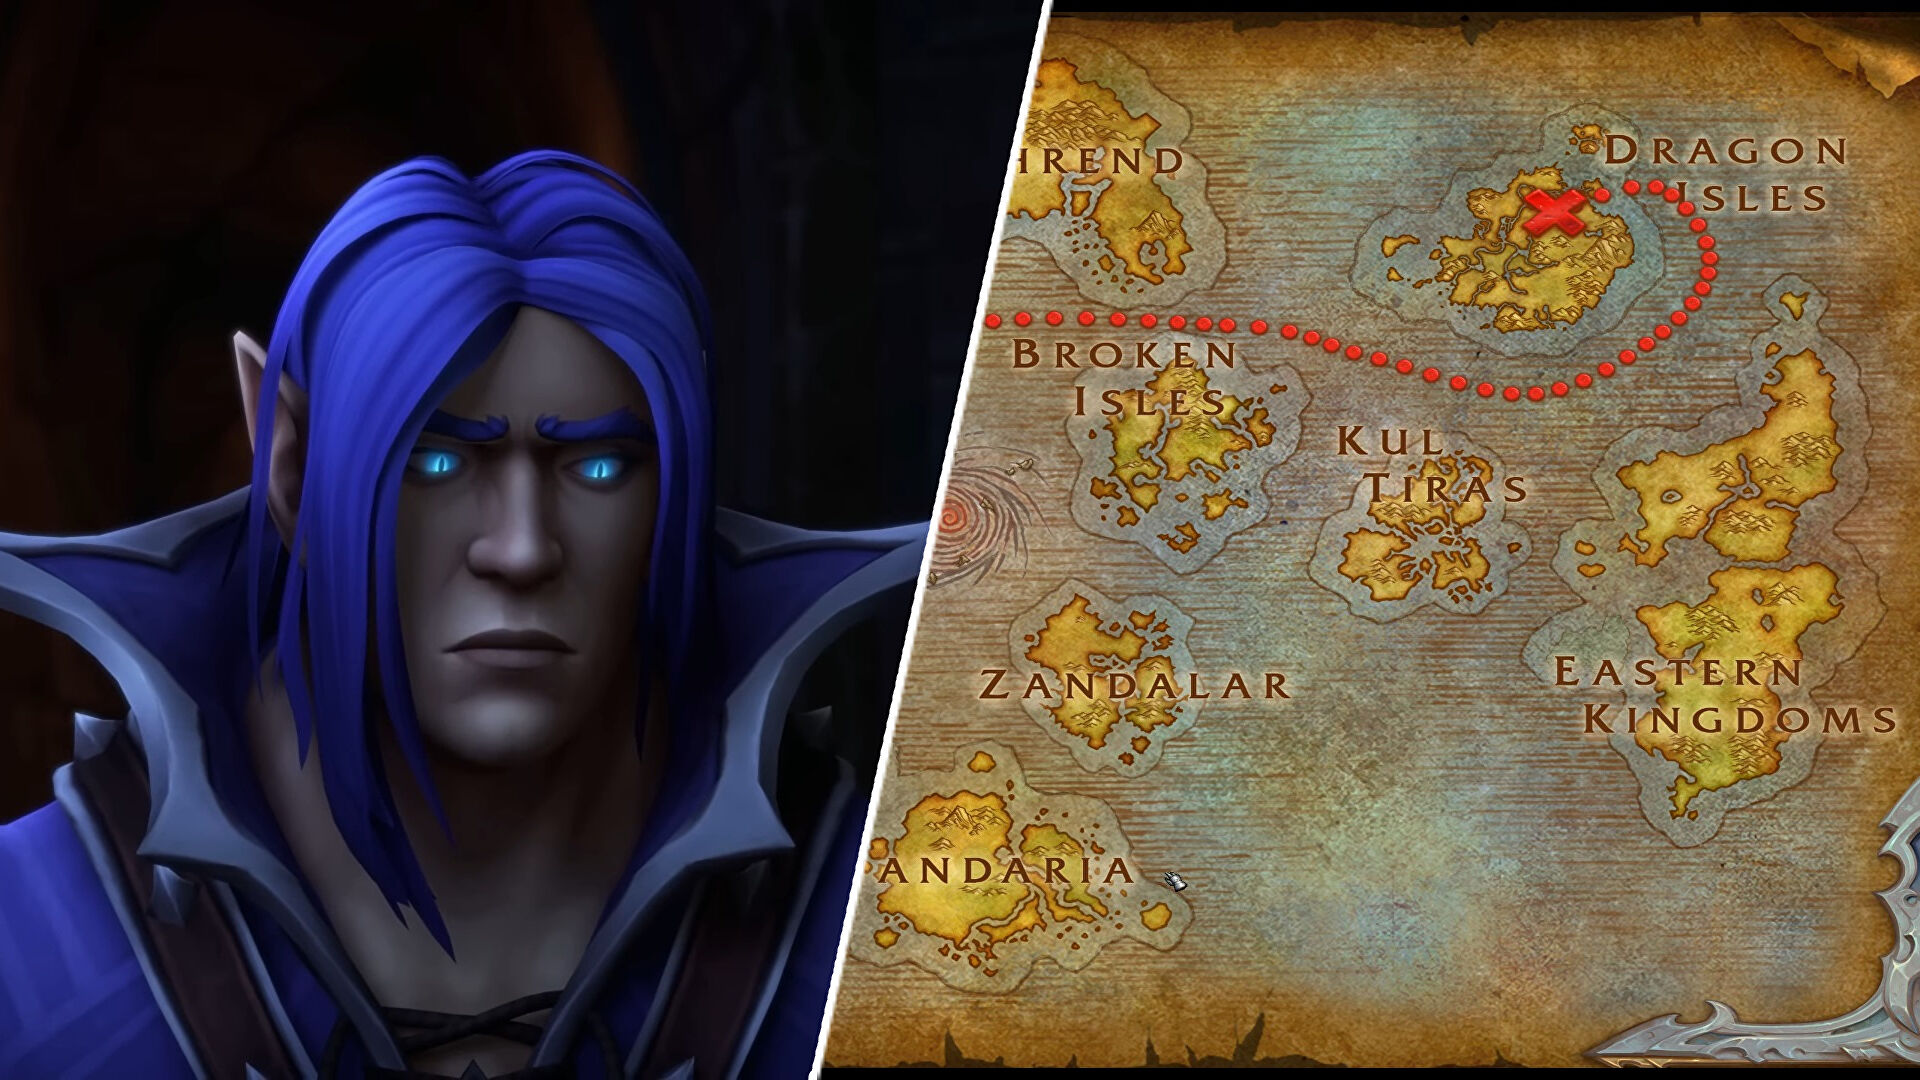 World of Warcraft: Dragonflight’s launch was a test of endurance